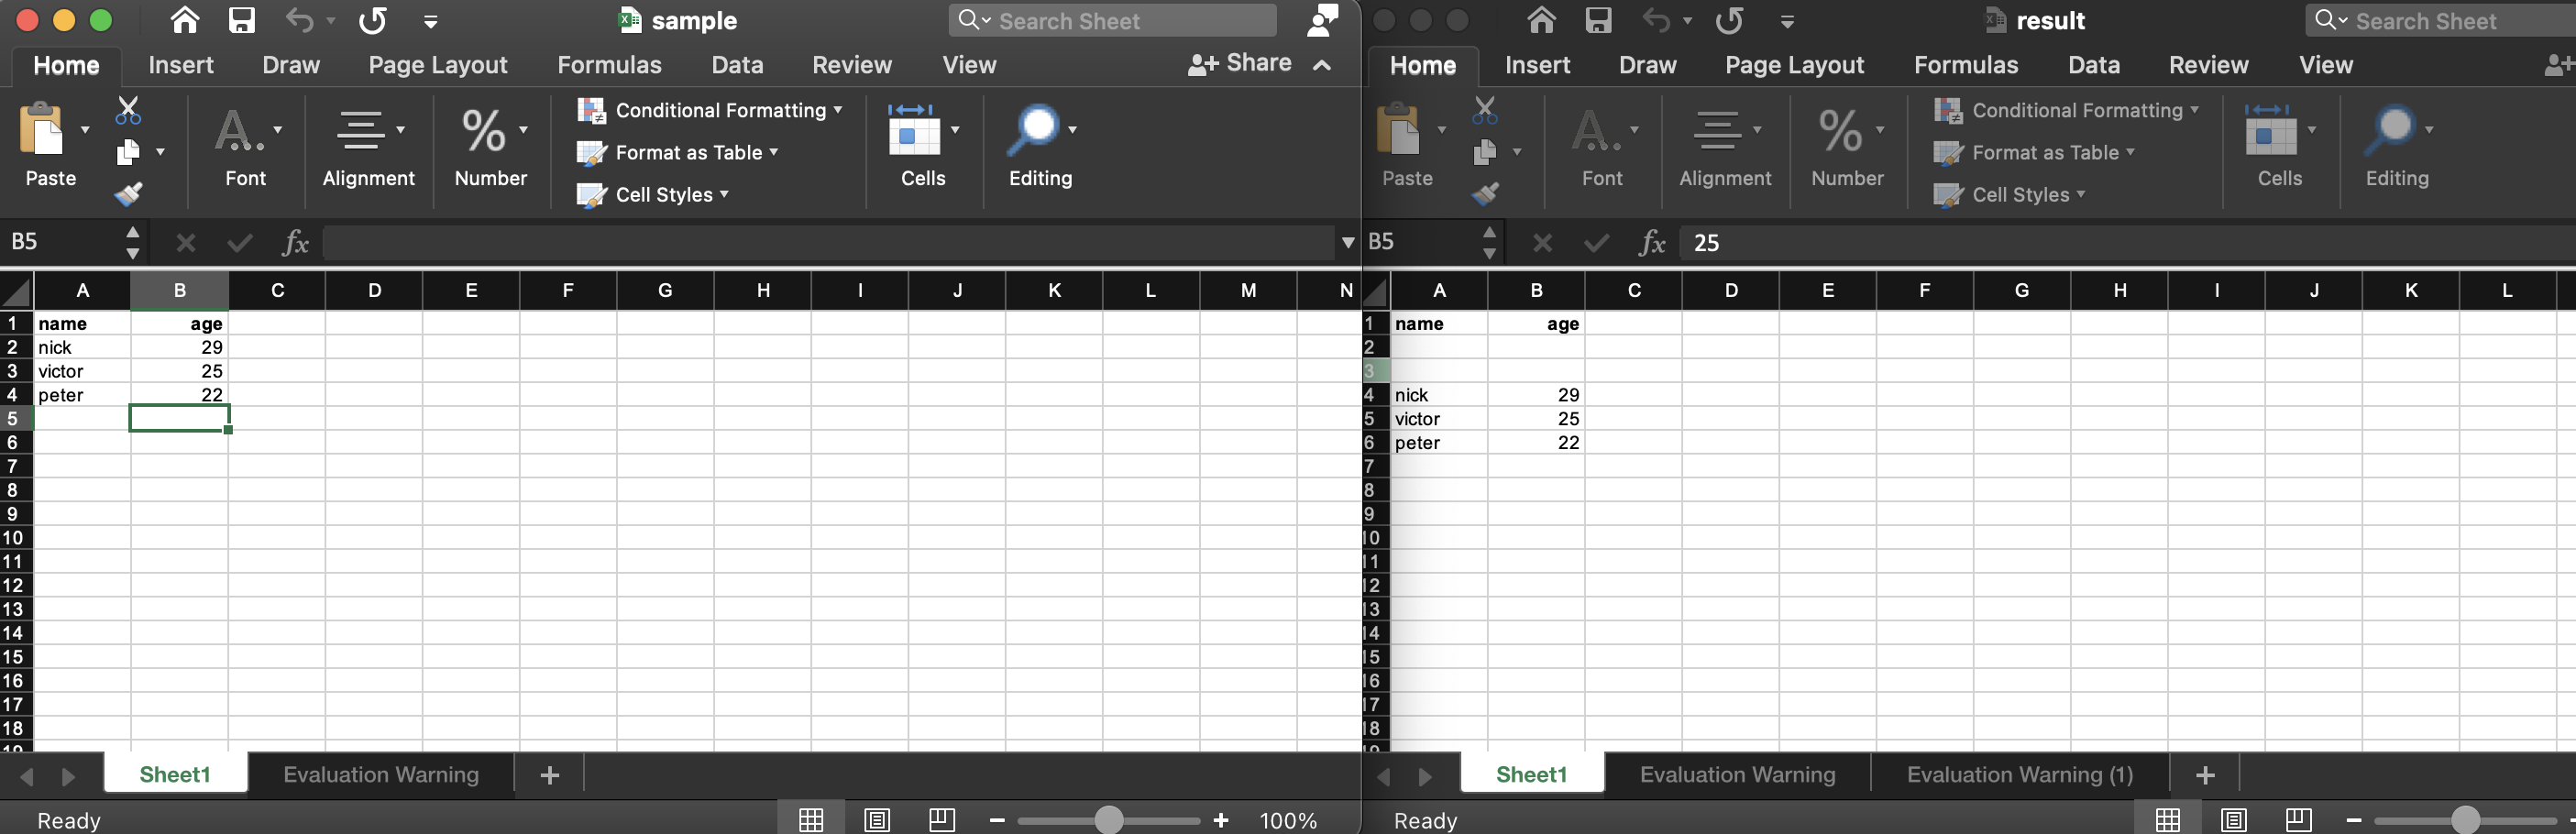 insert-rows-and-columns-in-excel-files-using-node-js